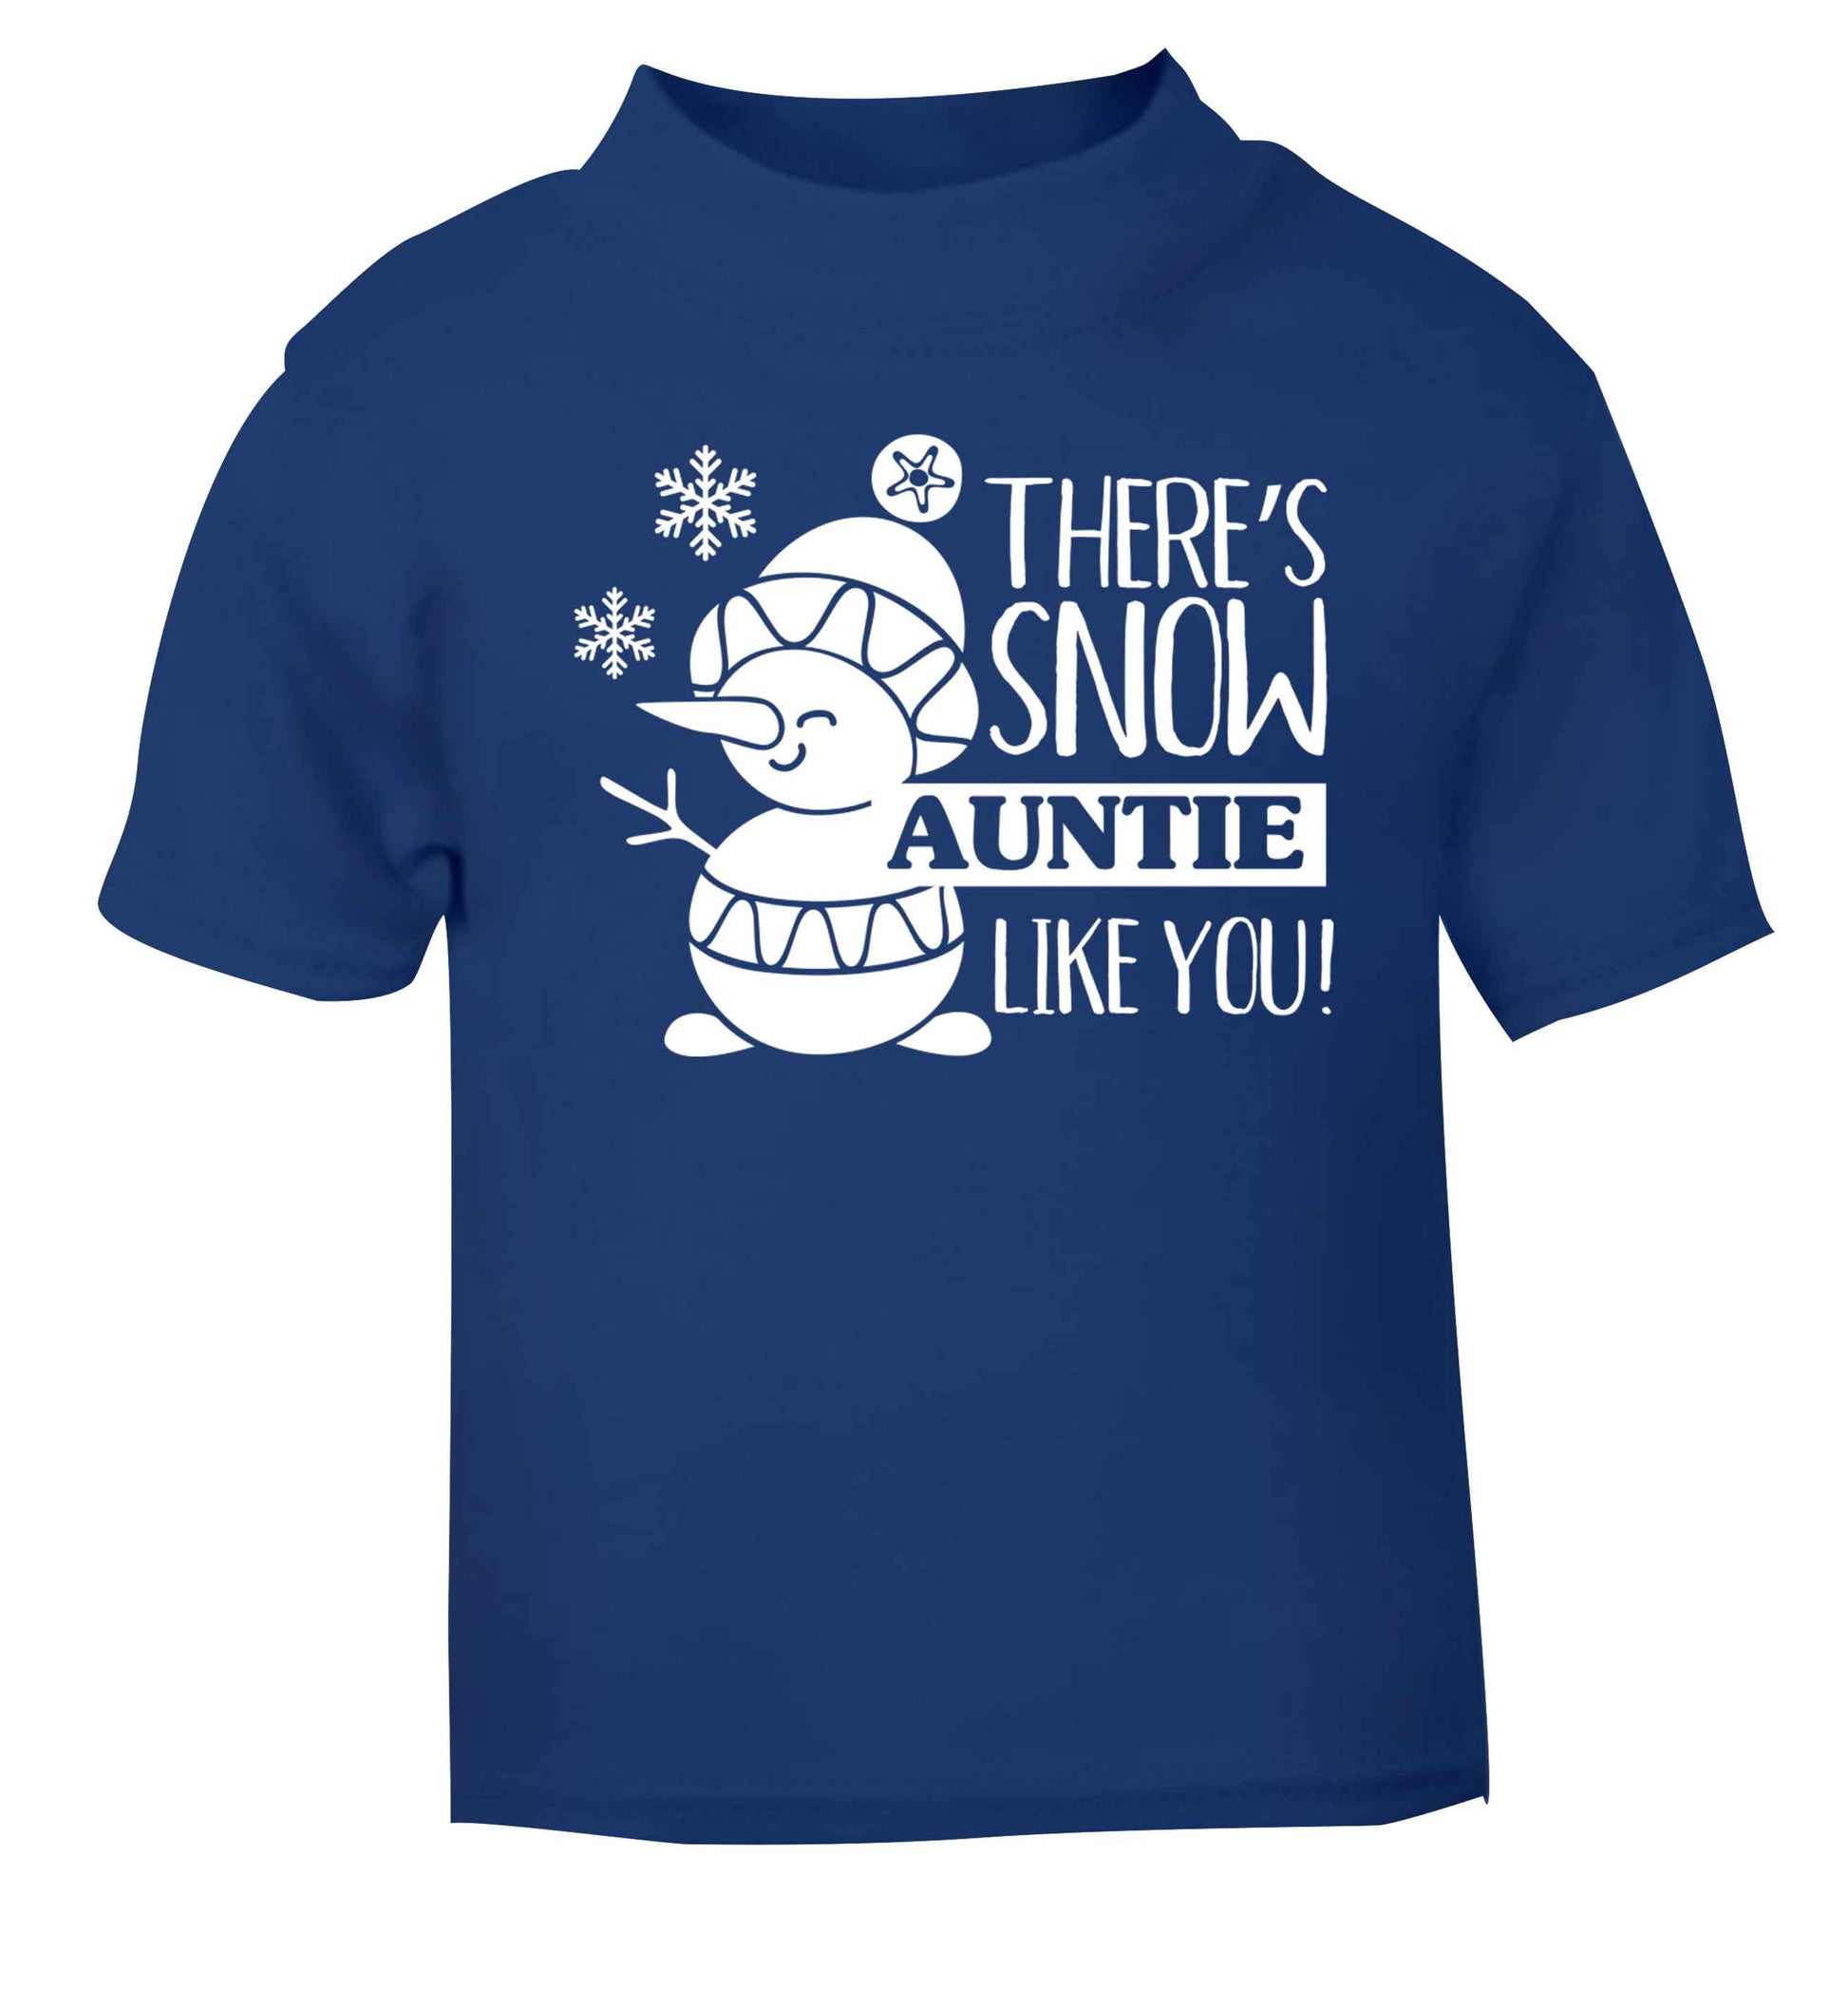 There's snow auntie like you blue baby toddler Tshirt 2 Years